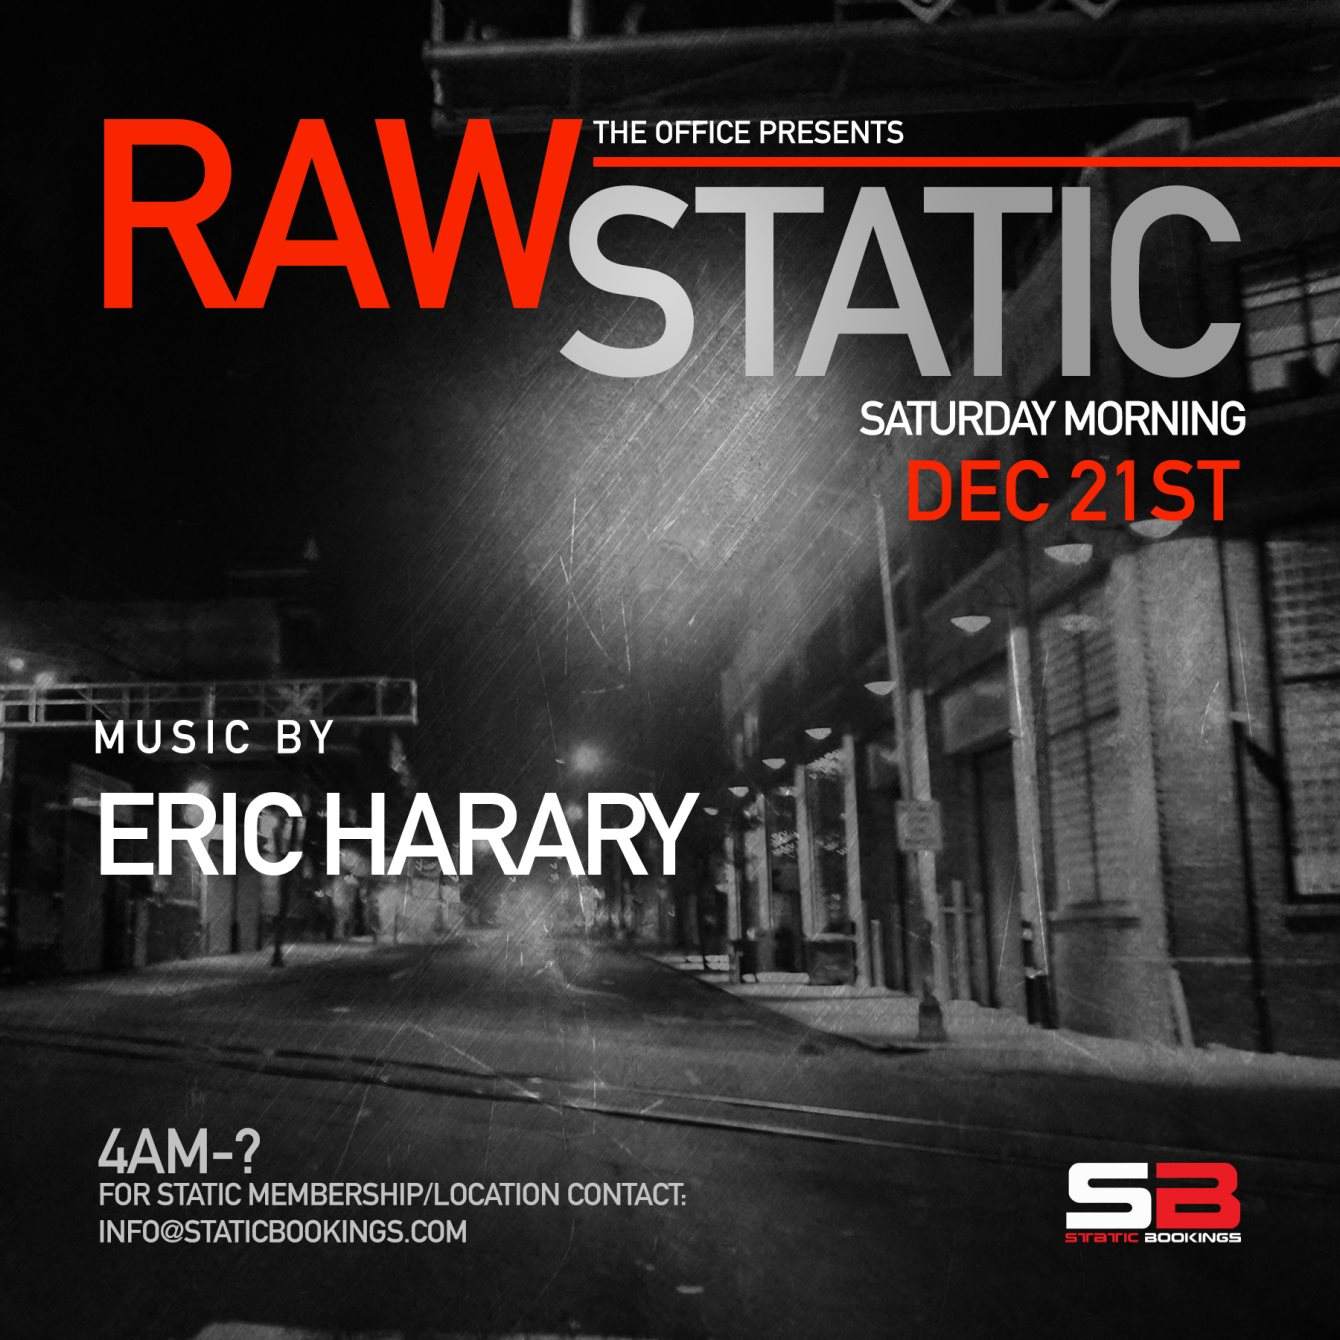 The Office presents: RAW Music By: Eric Harary - フライヤー表